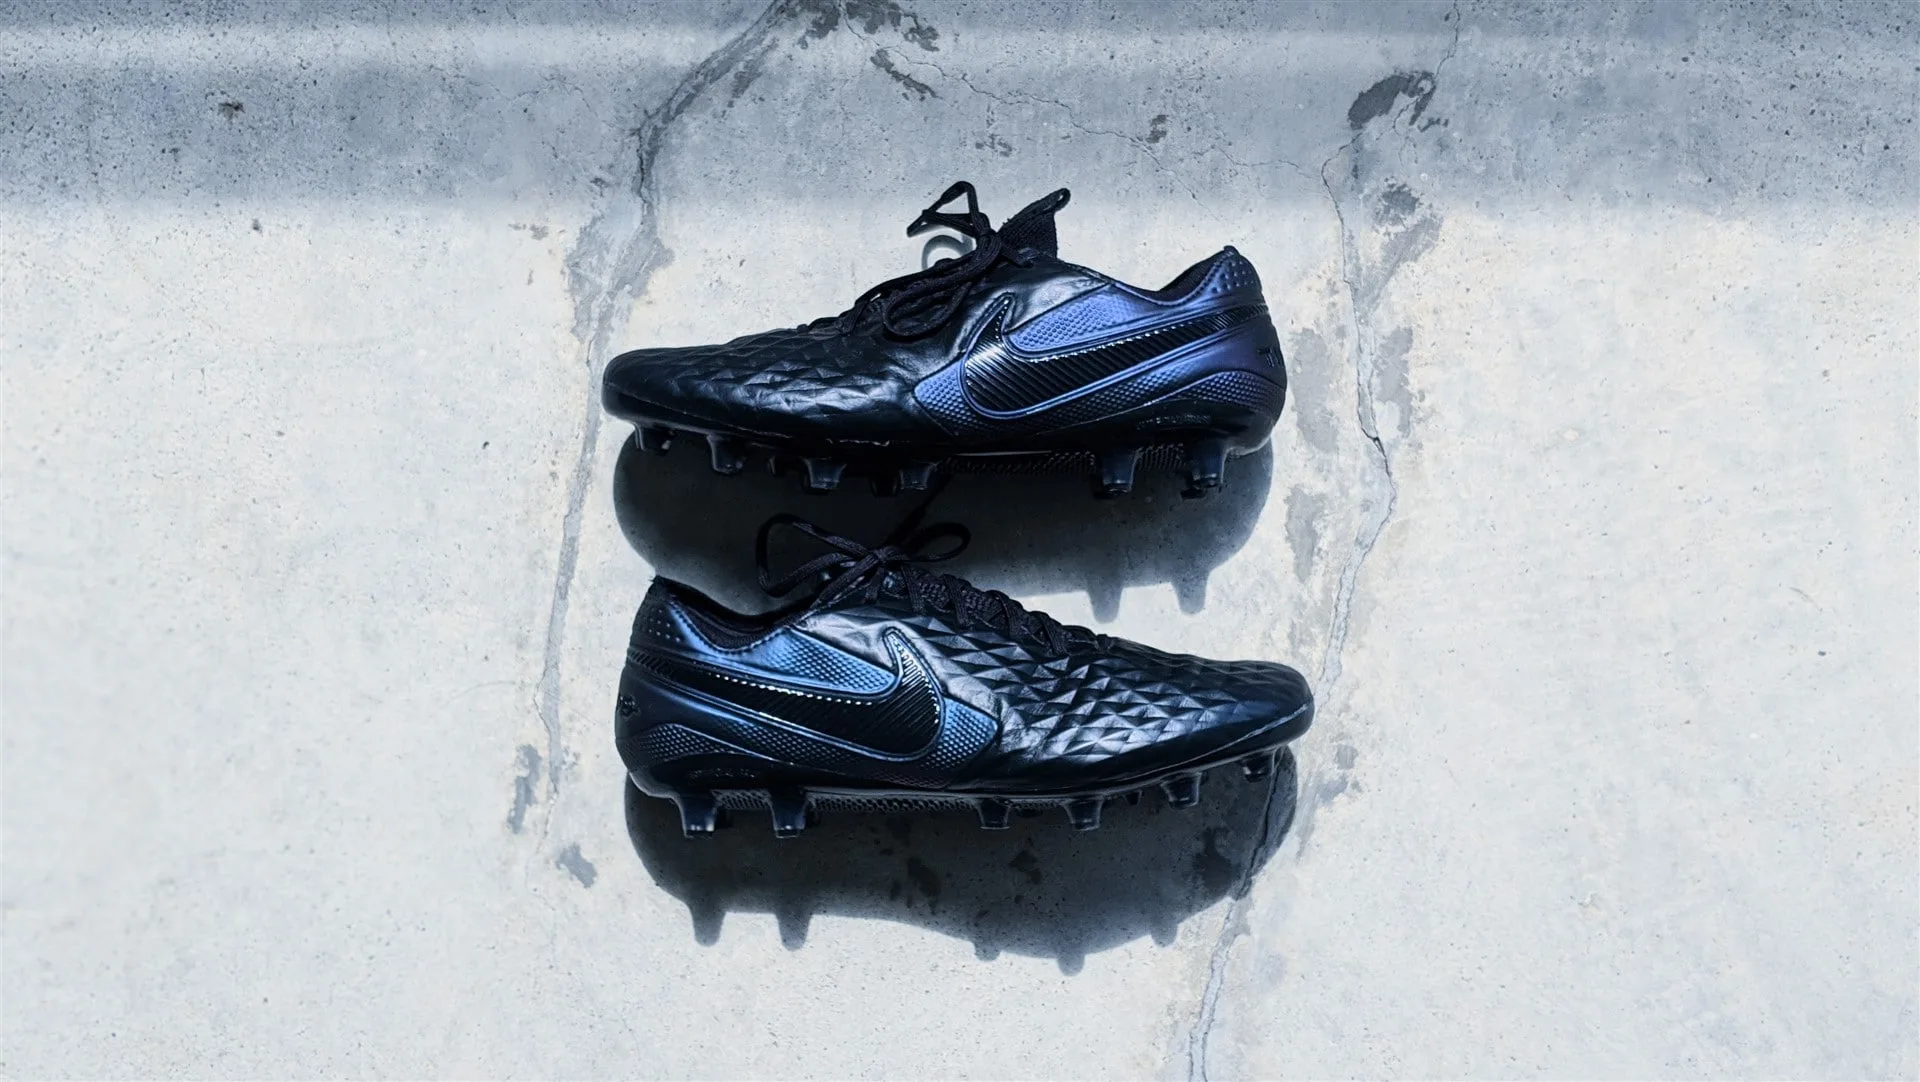 Nike Tiempo Legend 8 Elite football boots soccer cleats review